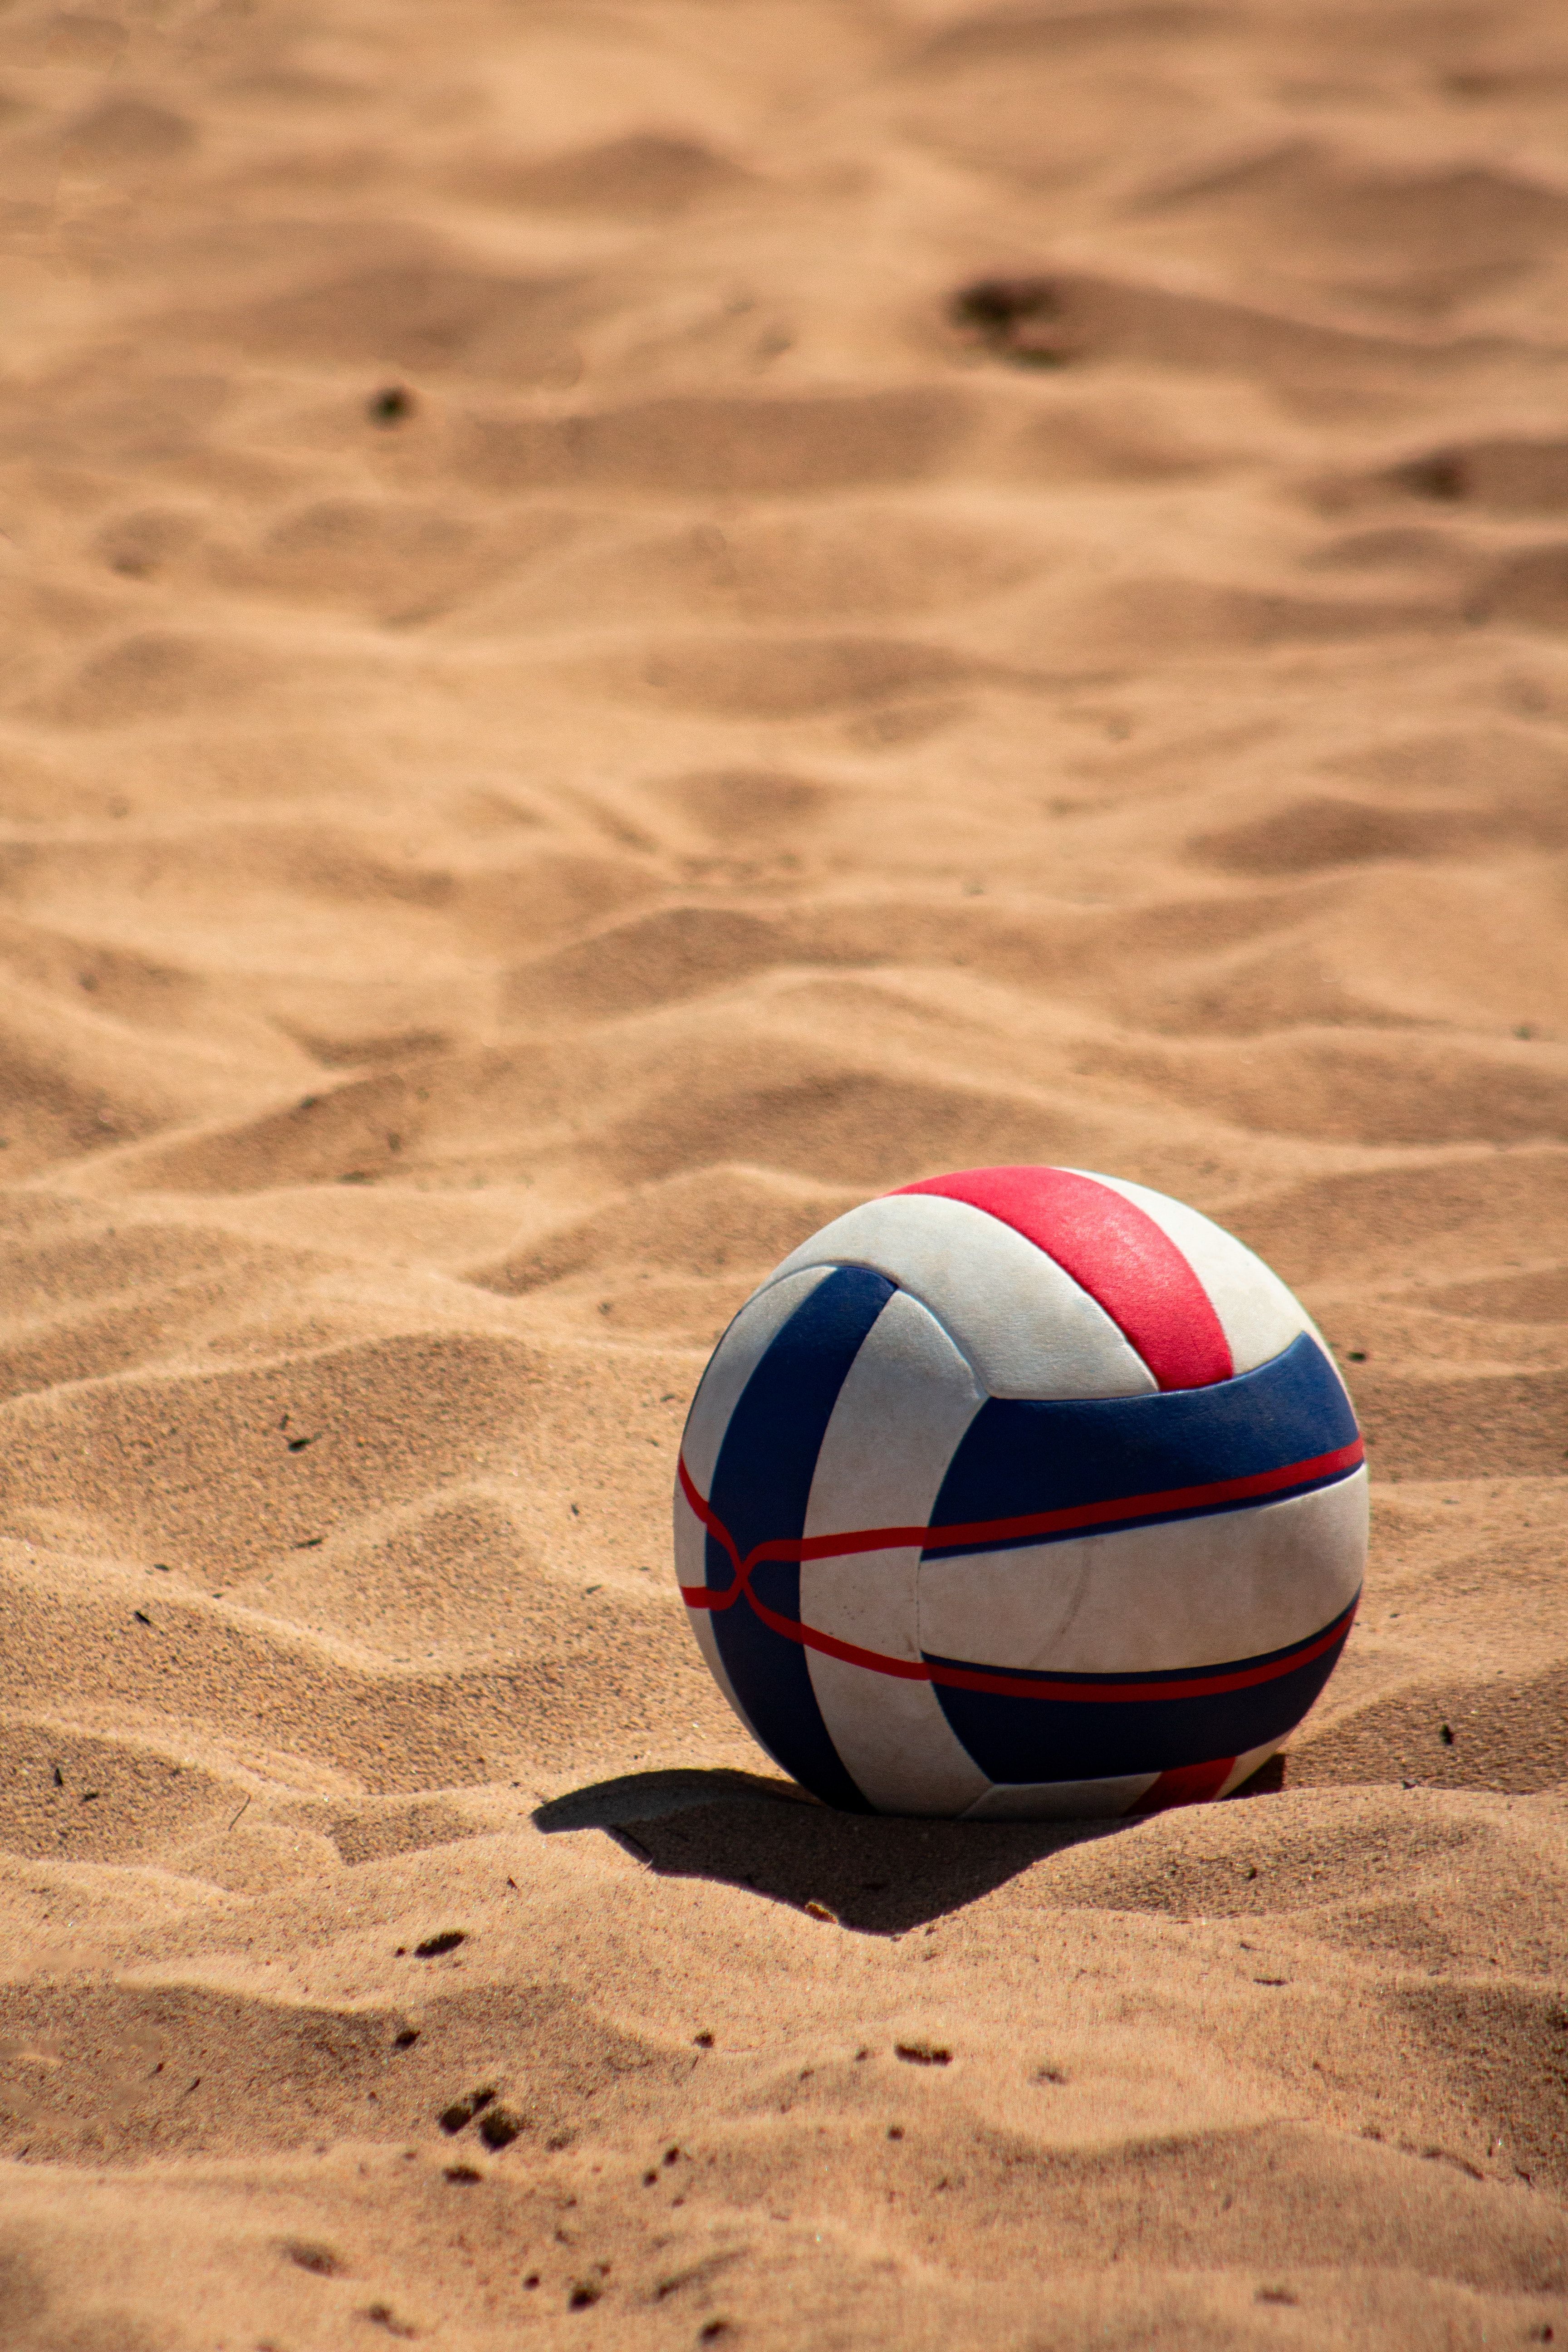 A ball is sitting on the sand - Volleyball